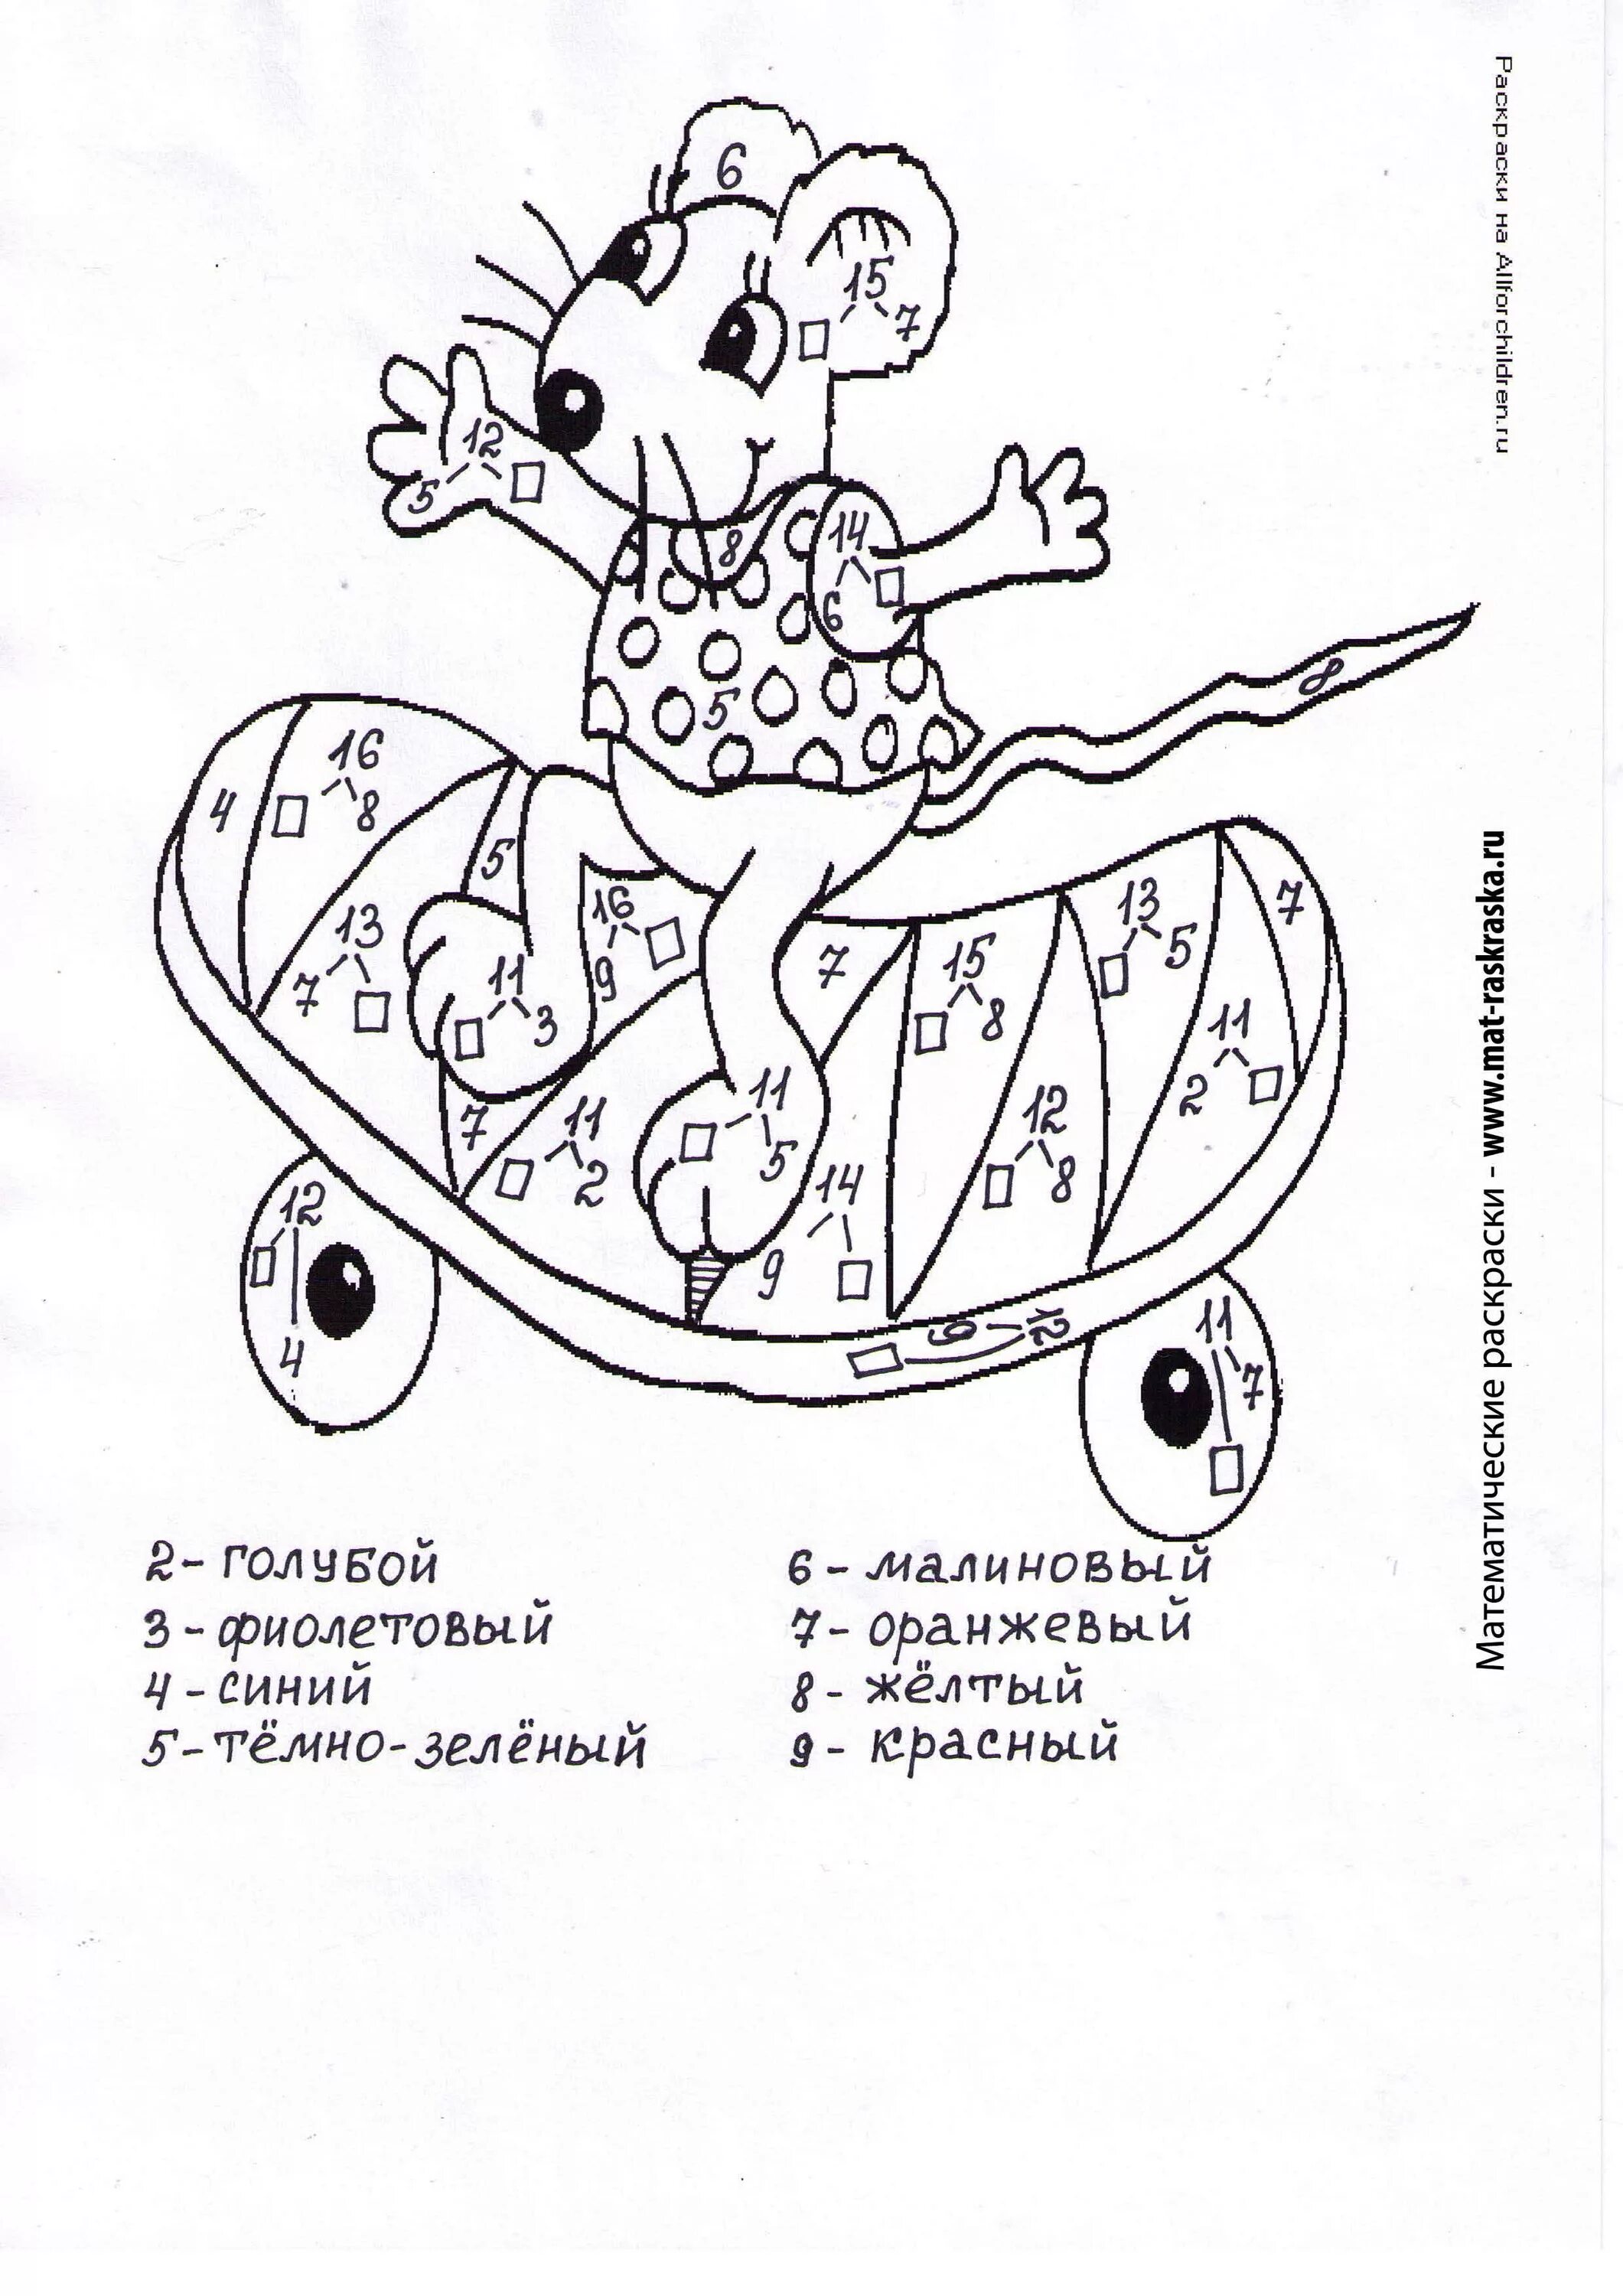 Through a dozen coloring pages with examples